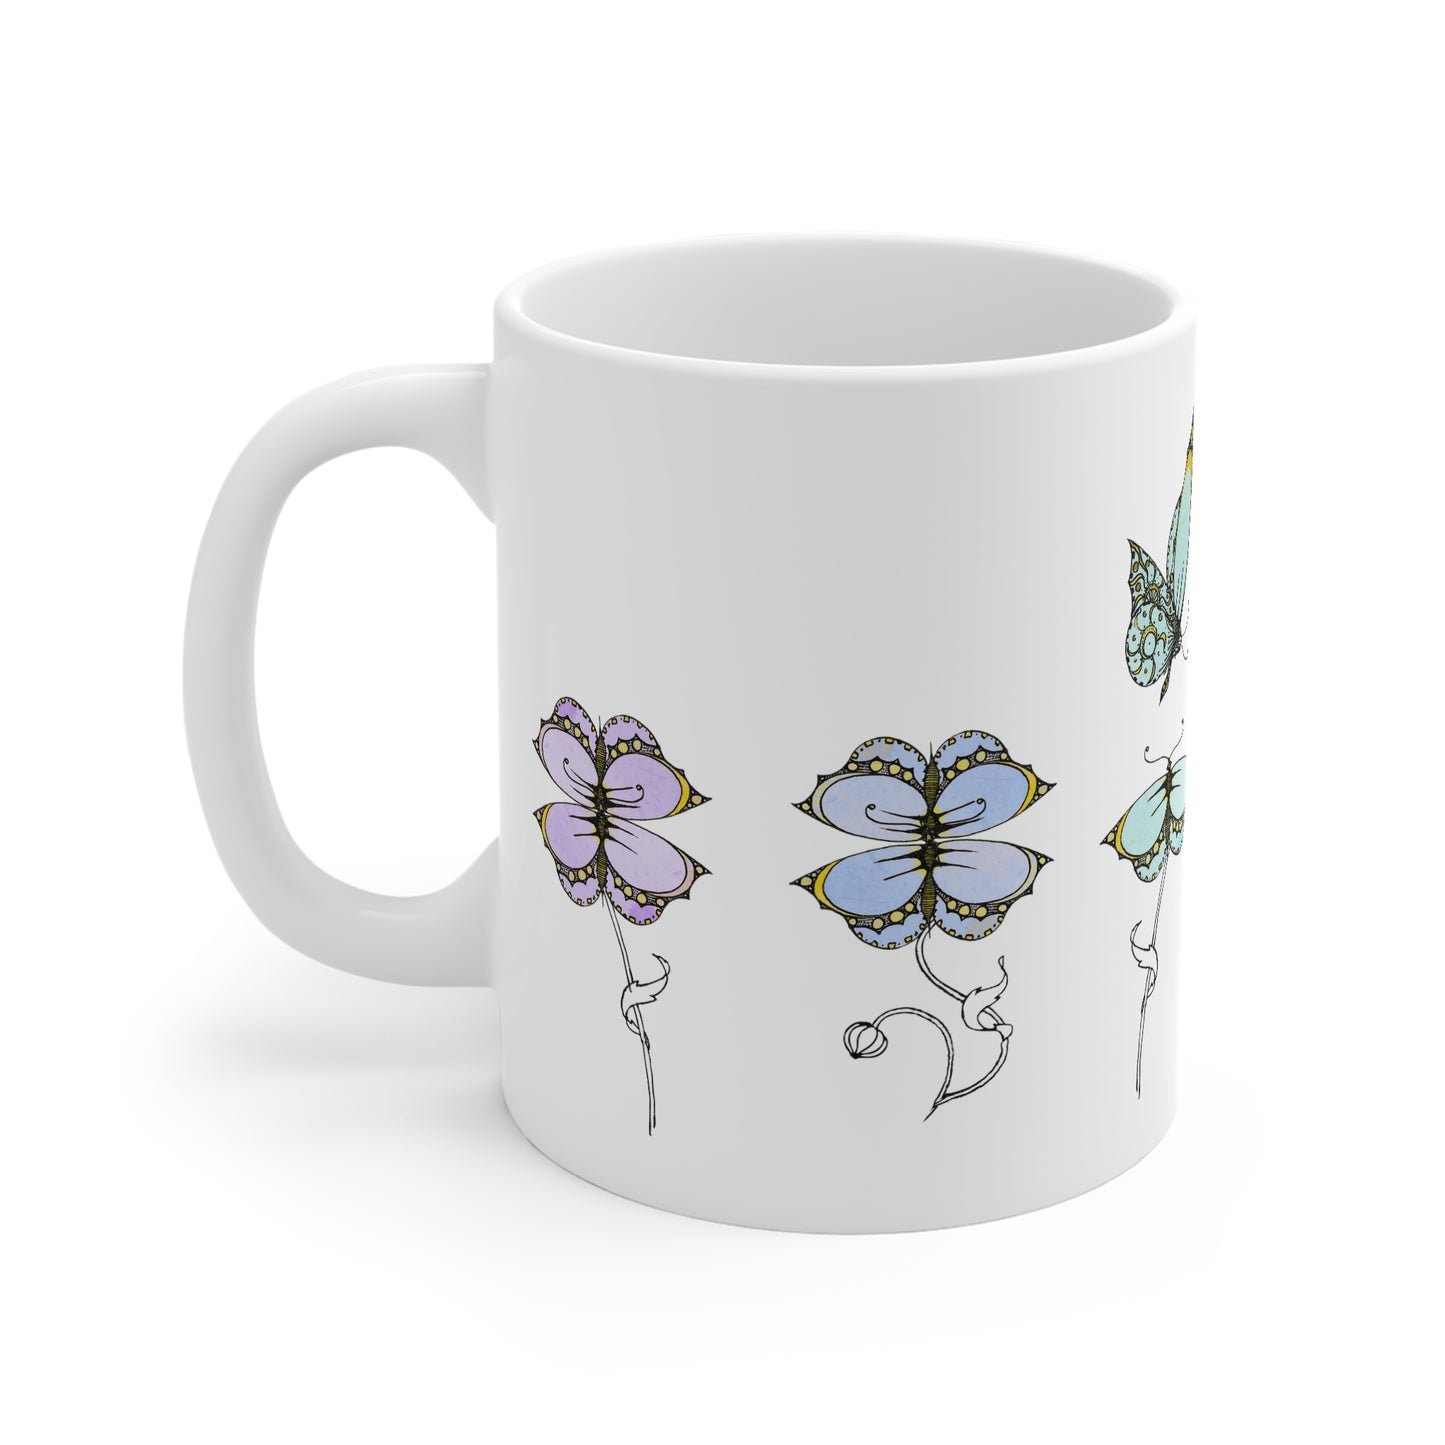 Let Go and Fly butterfly garden Mug 11oz; Inspirational, positivity, affirmation, gardening, coffee, gift for her